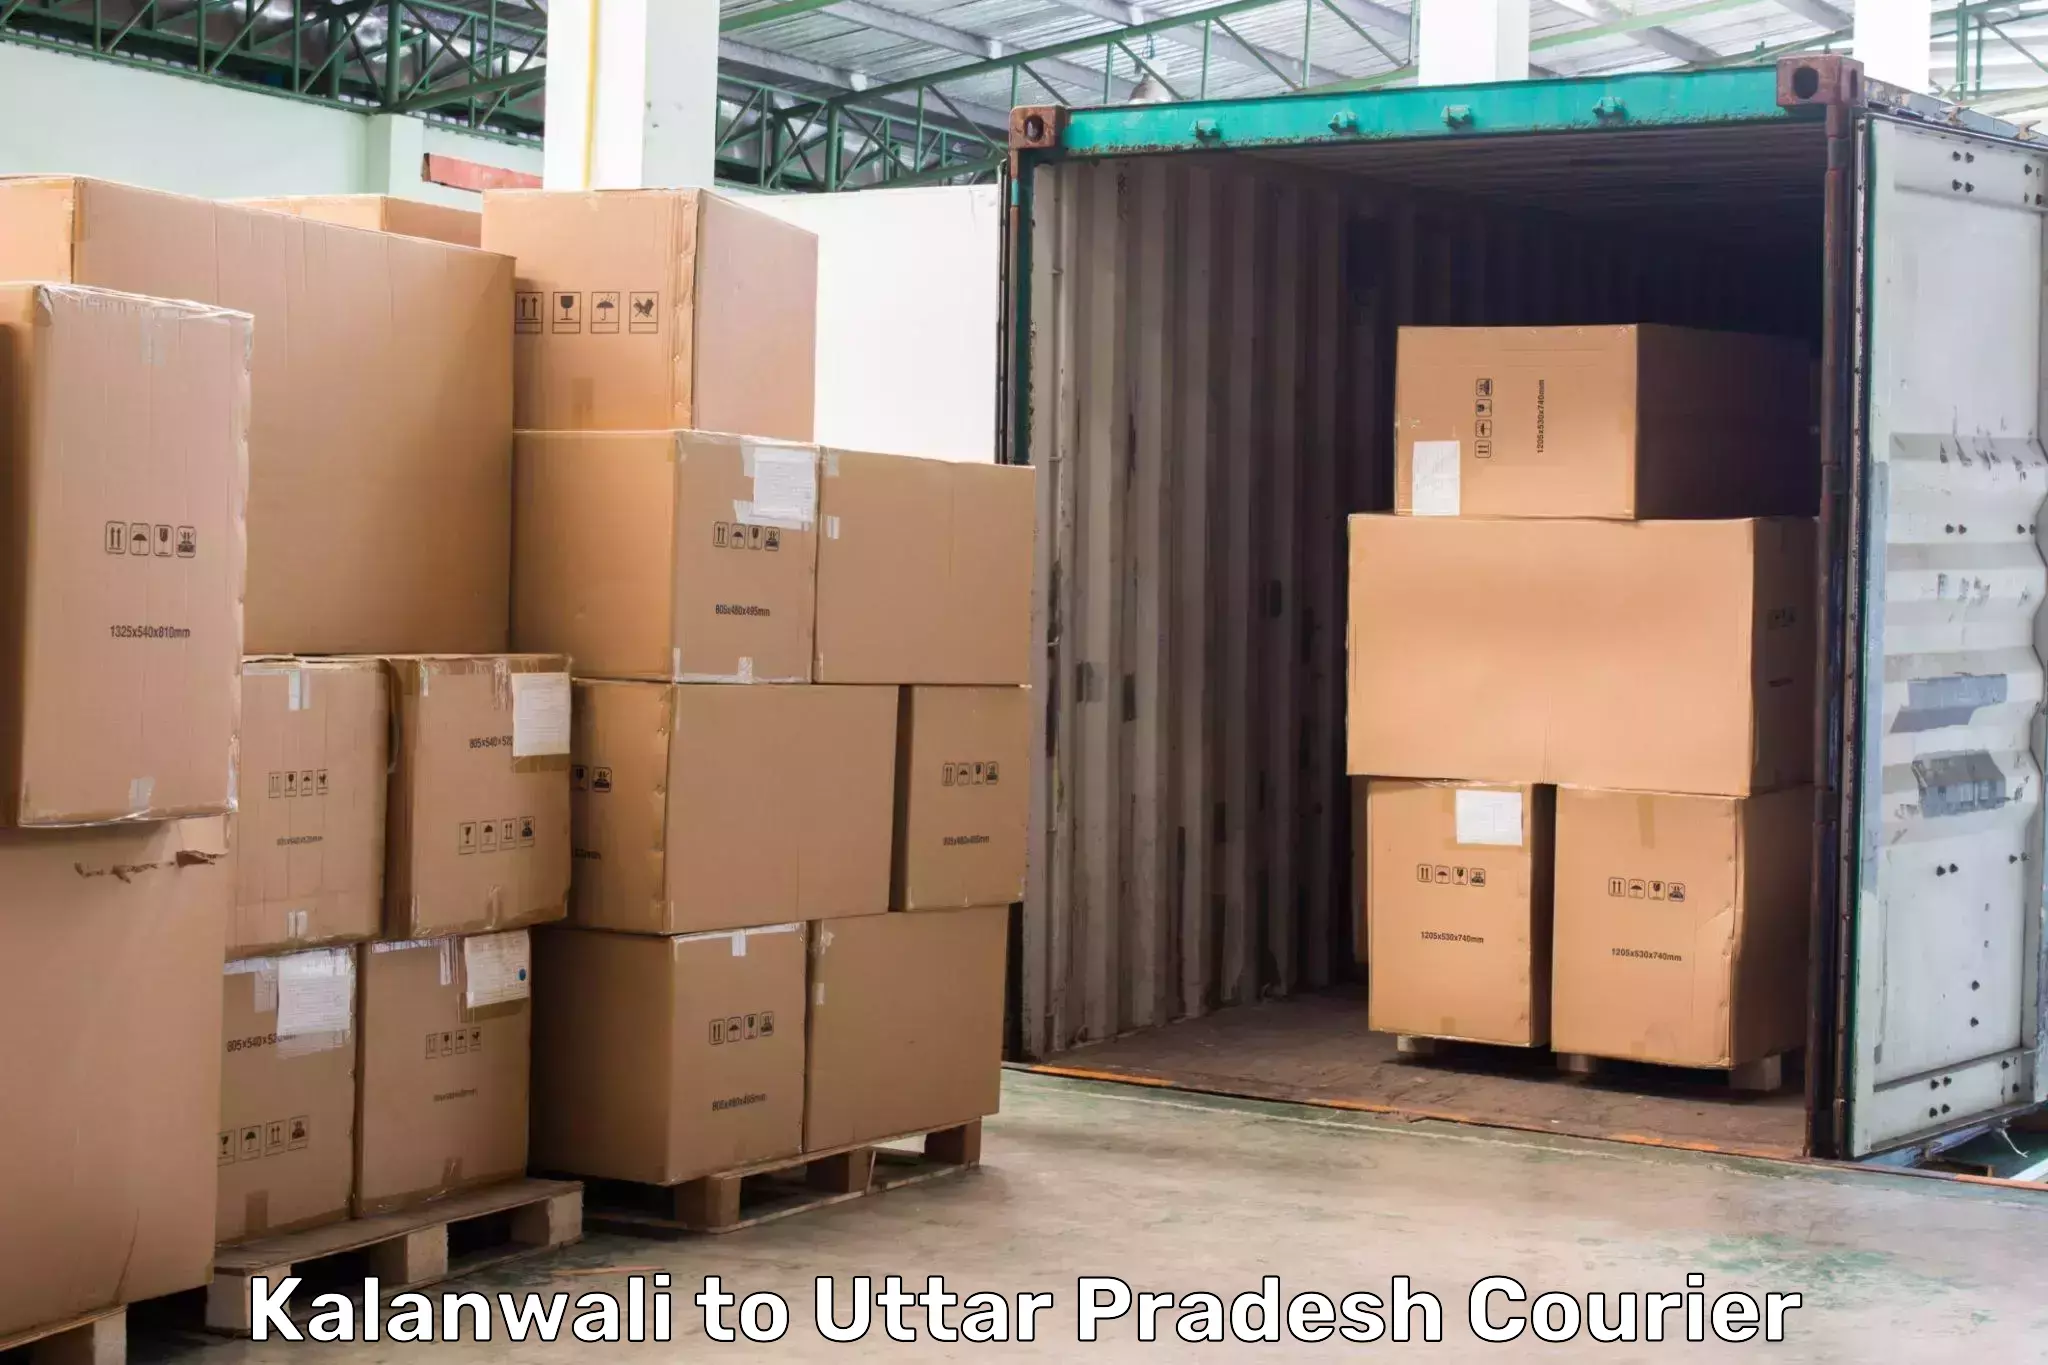 24/7 courier service Kalanwali to Mohammadi